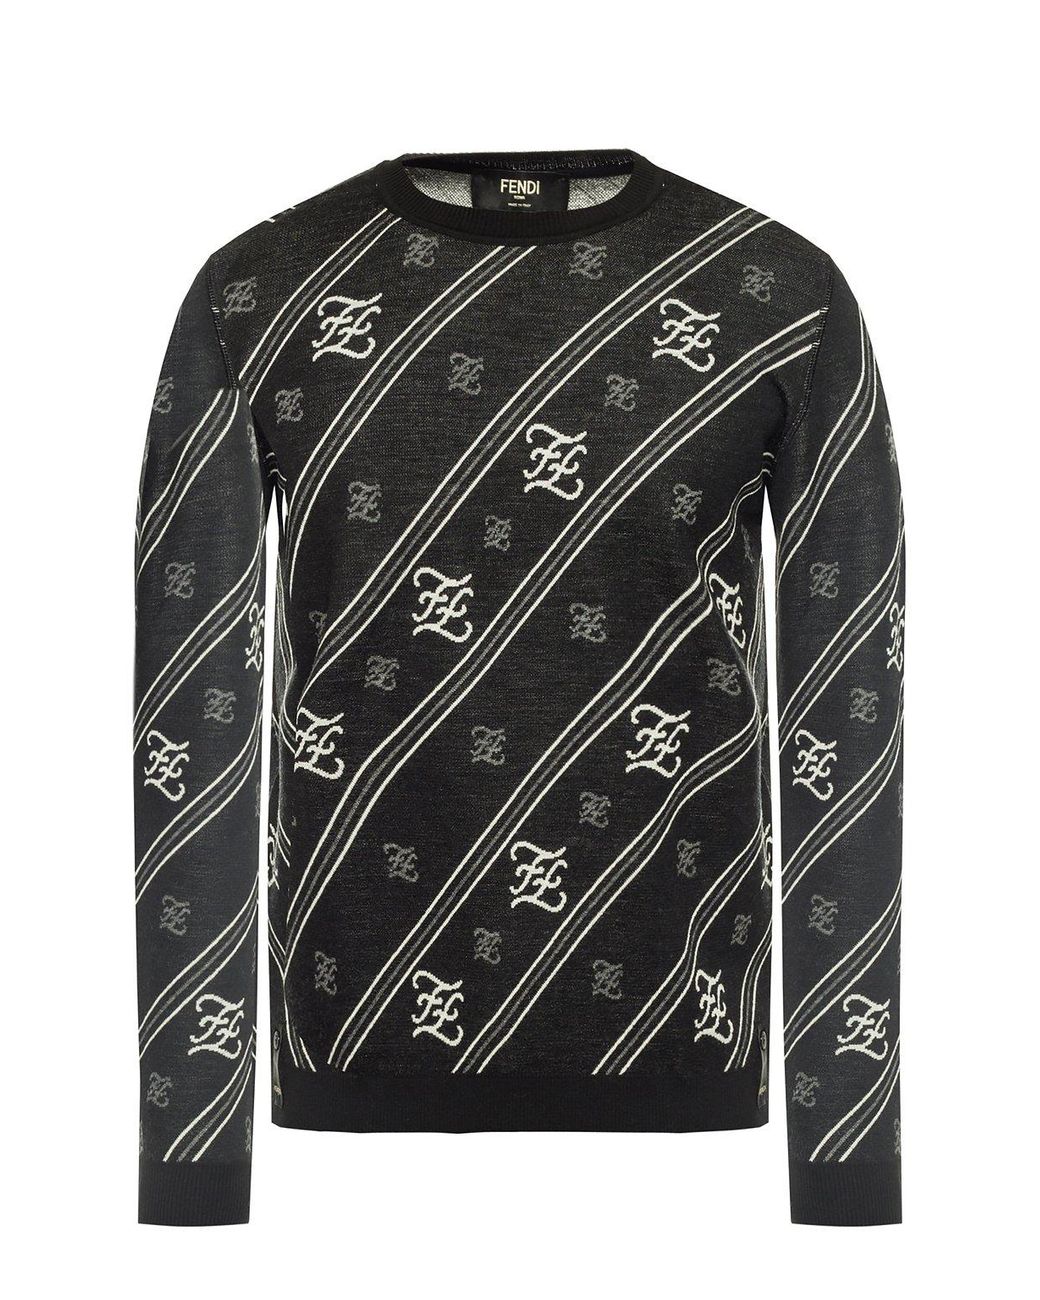 Fendi Wool Pullover in Black for Men - Save 12% - Lyst